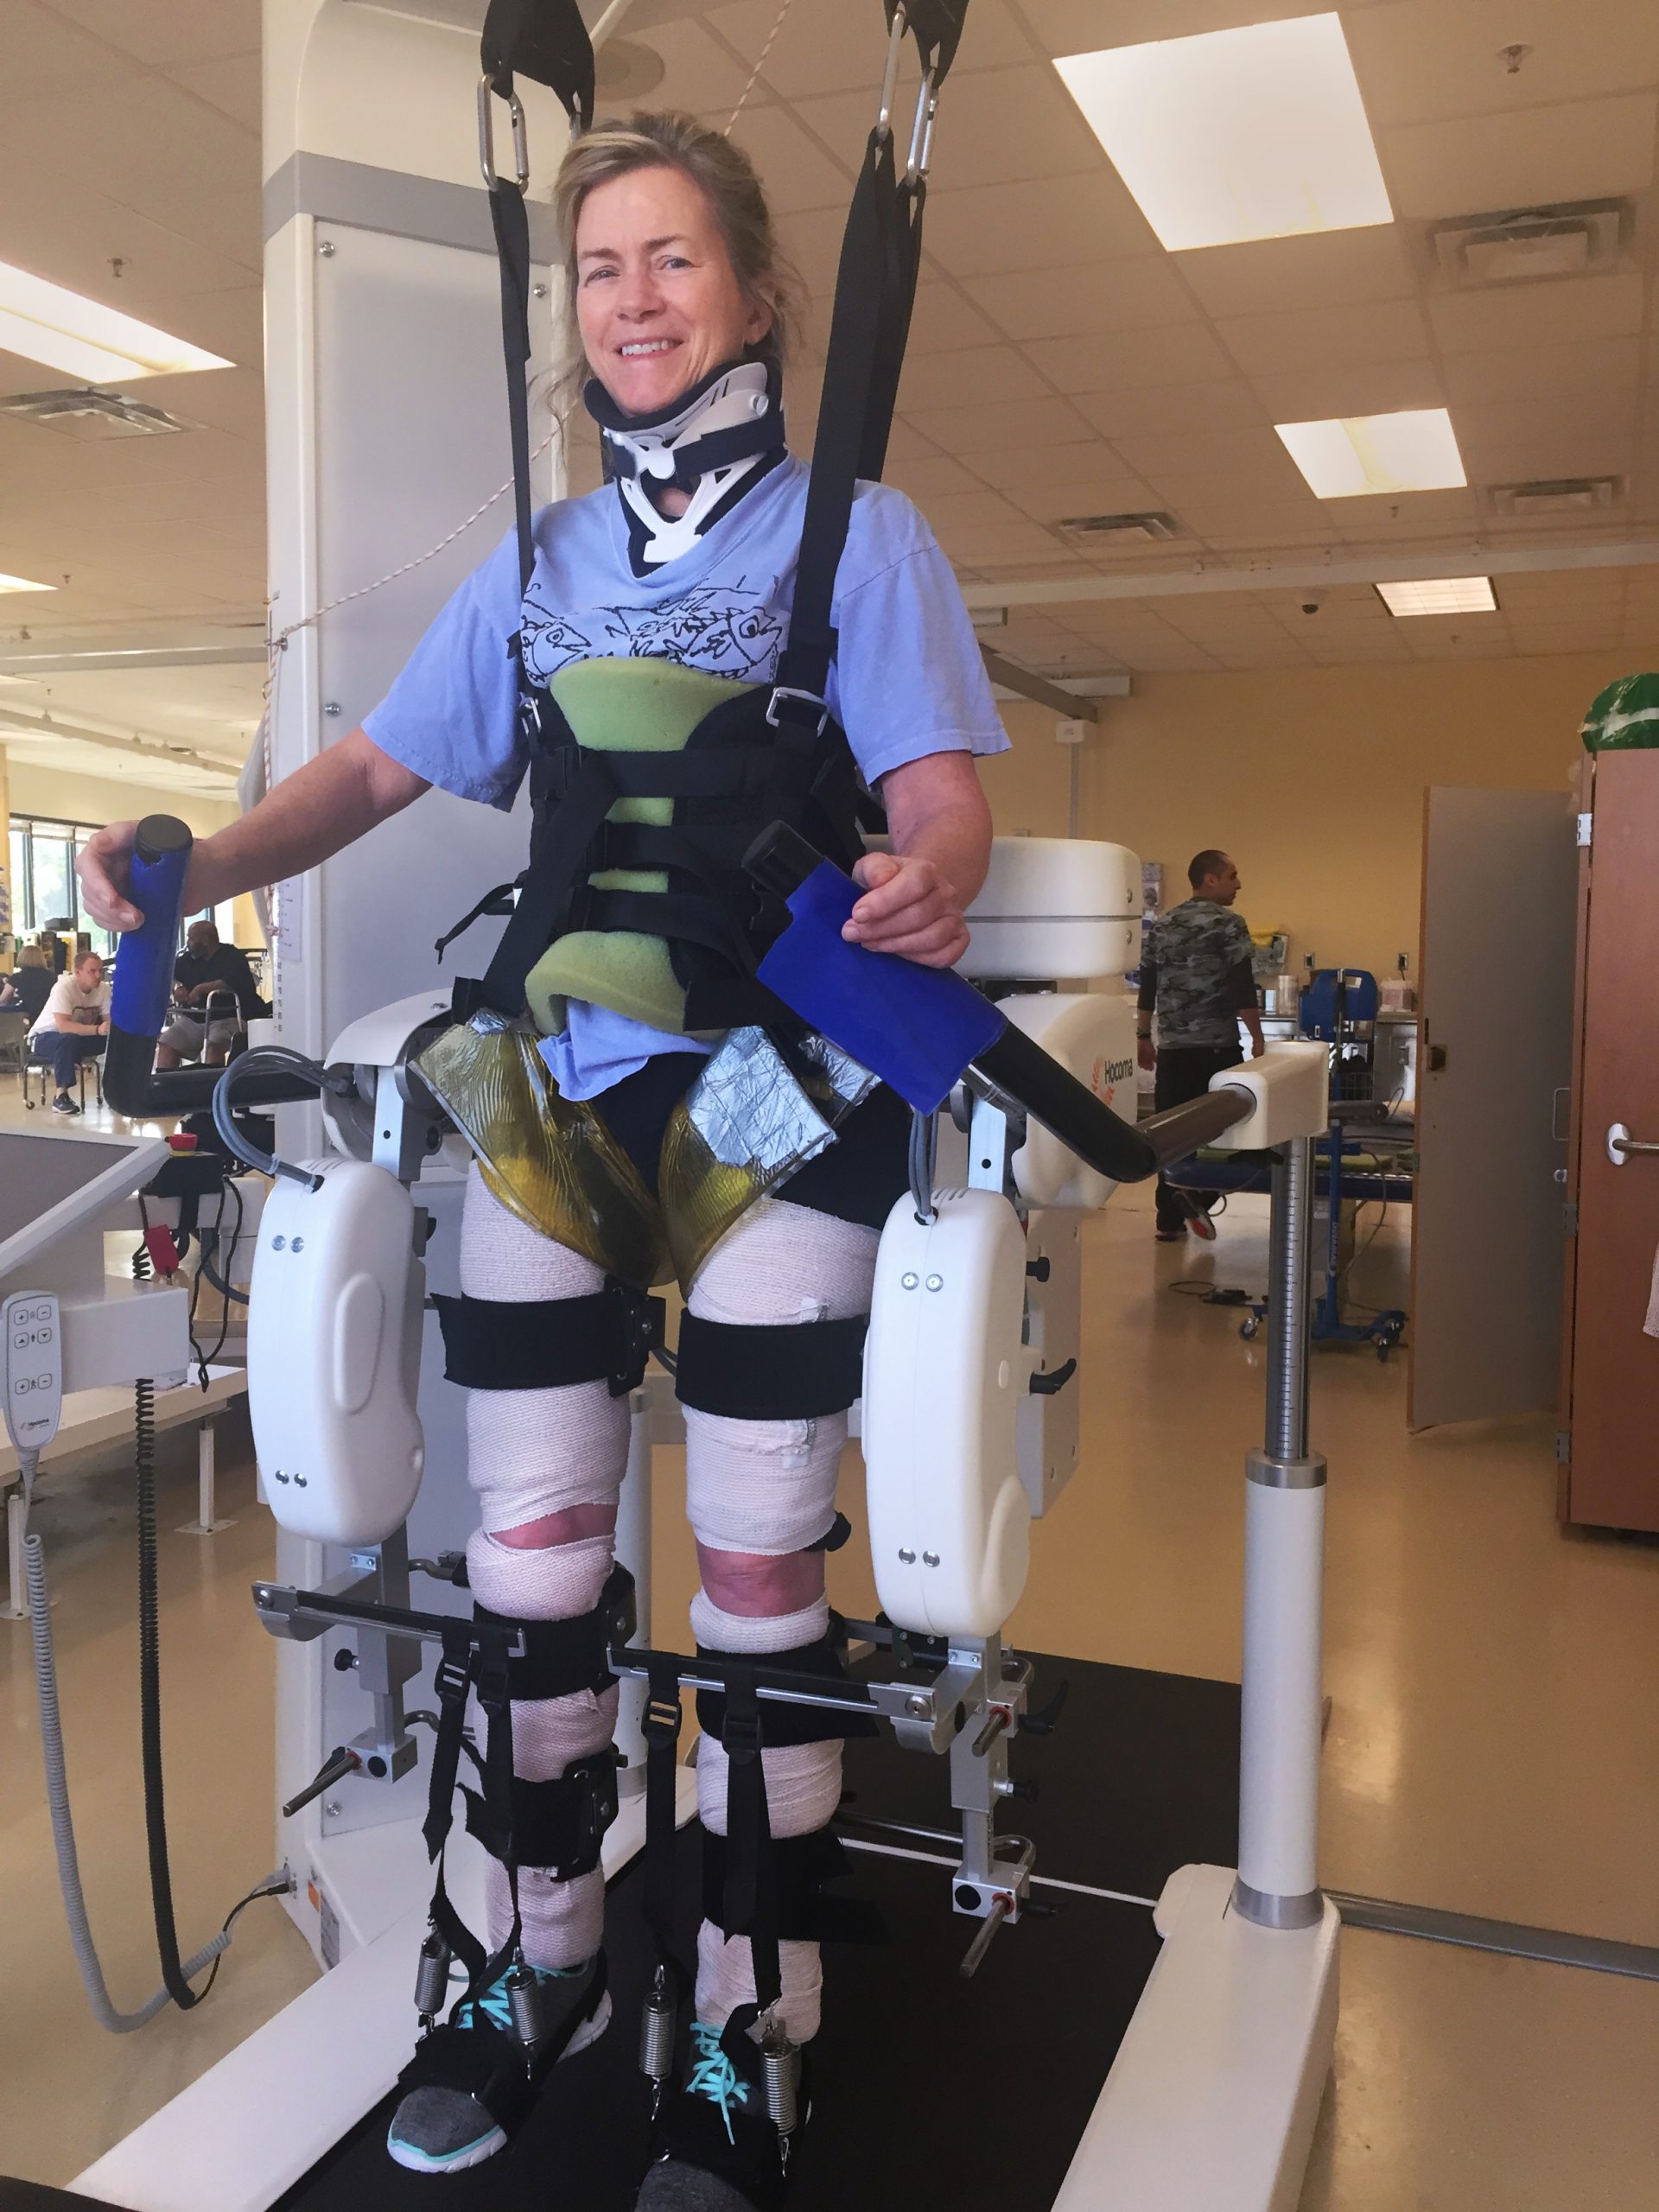 One of Ann’s first forms of therapy in May 2019 at the Shepherd Center was to work with the Robot approximately two times a week. It was a very emotional moment when she saw herself in a mirror upright for the first time since her accident. Being strapped in and slowly learning to move her limbs was the first step in retraining her muscles. 